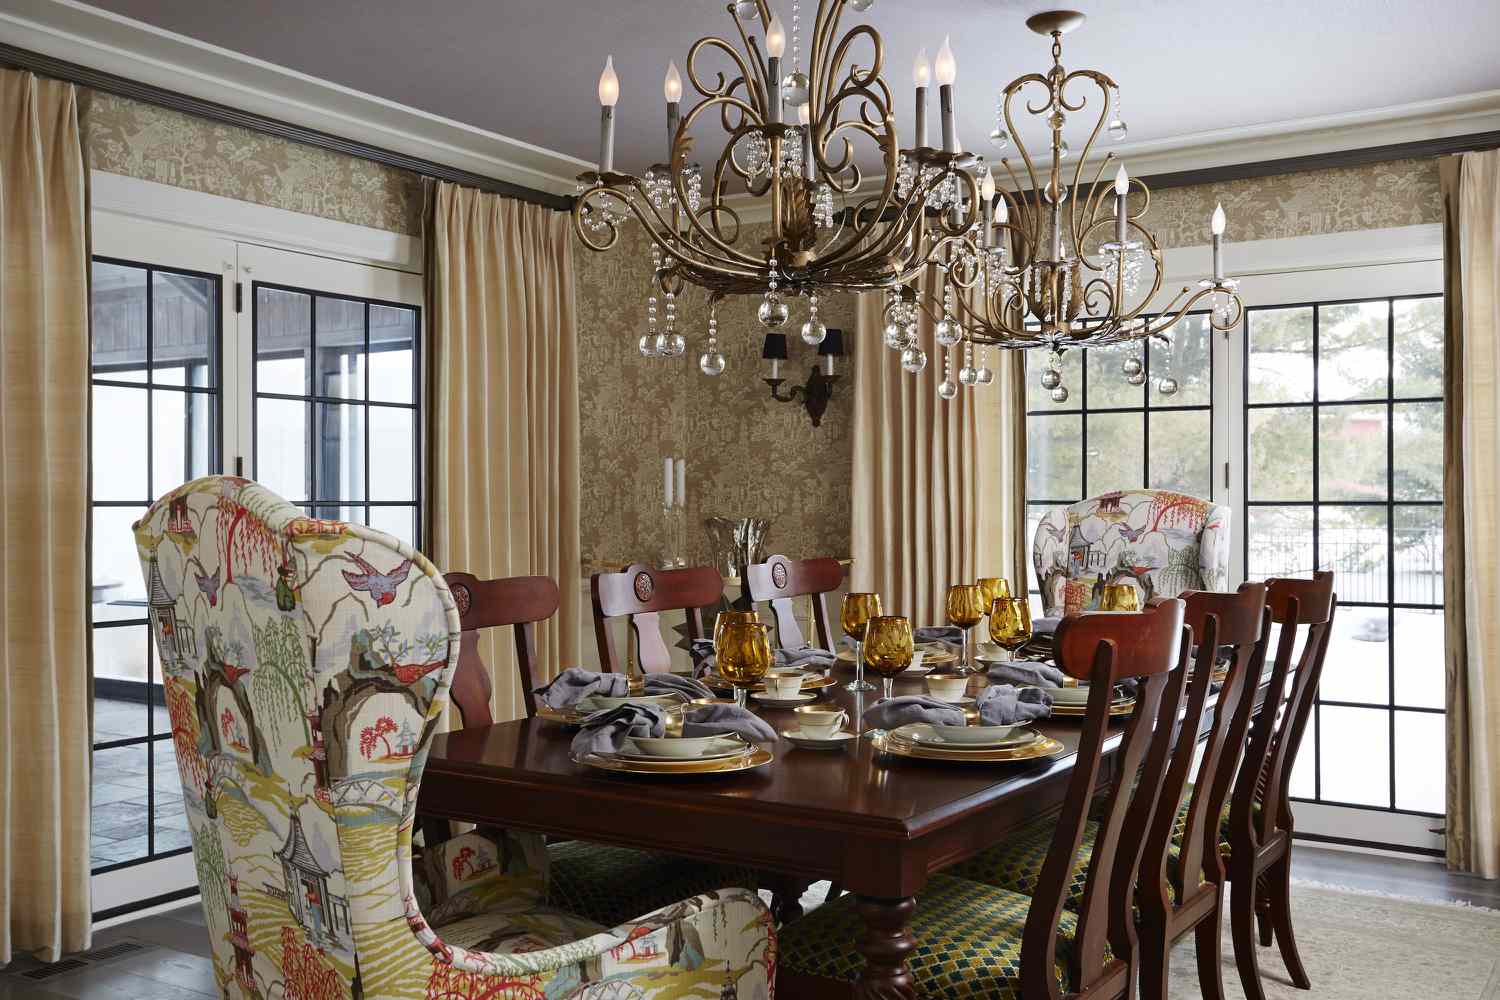 Formal vintage dining room with ornate chandelier and wallpapered walls.